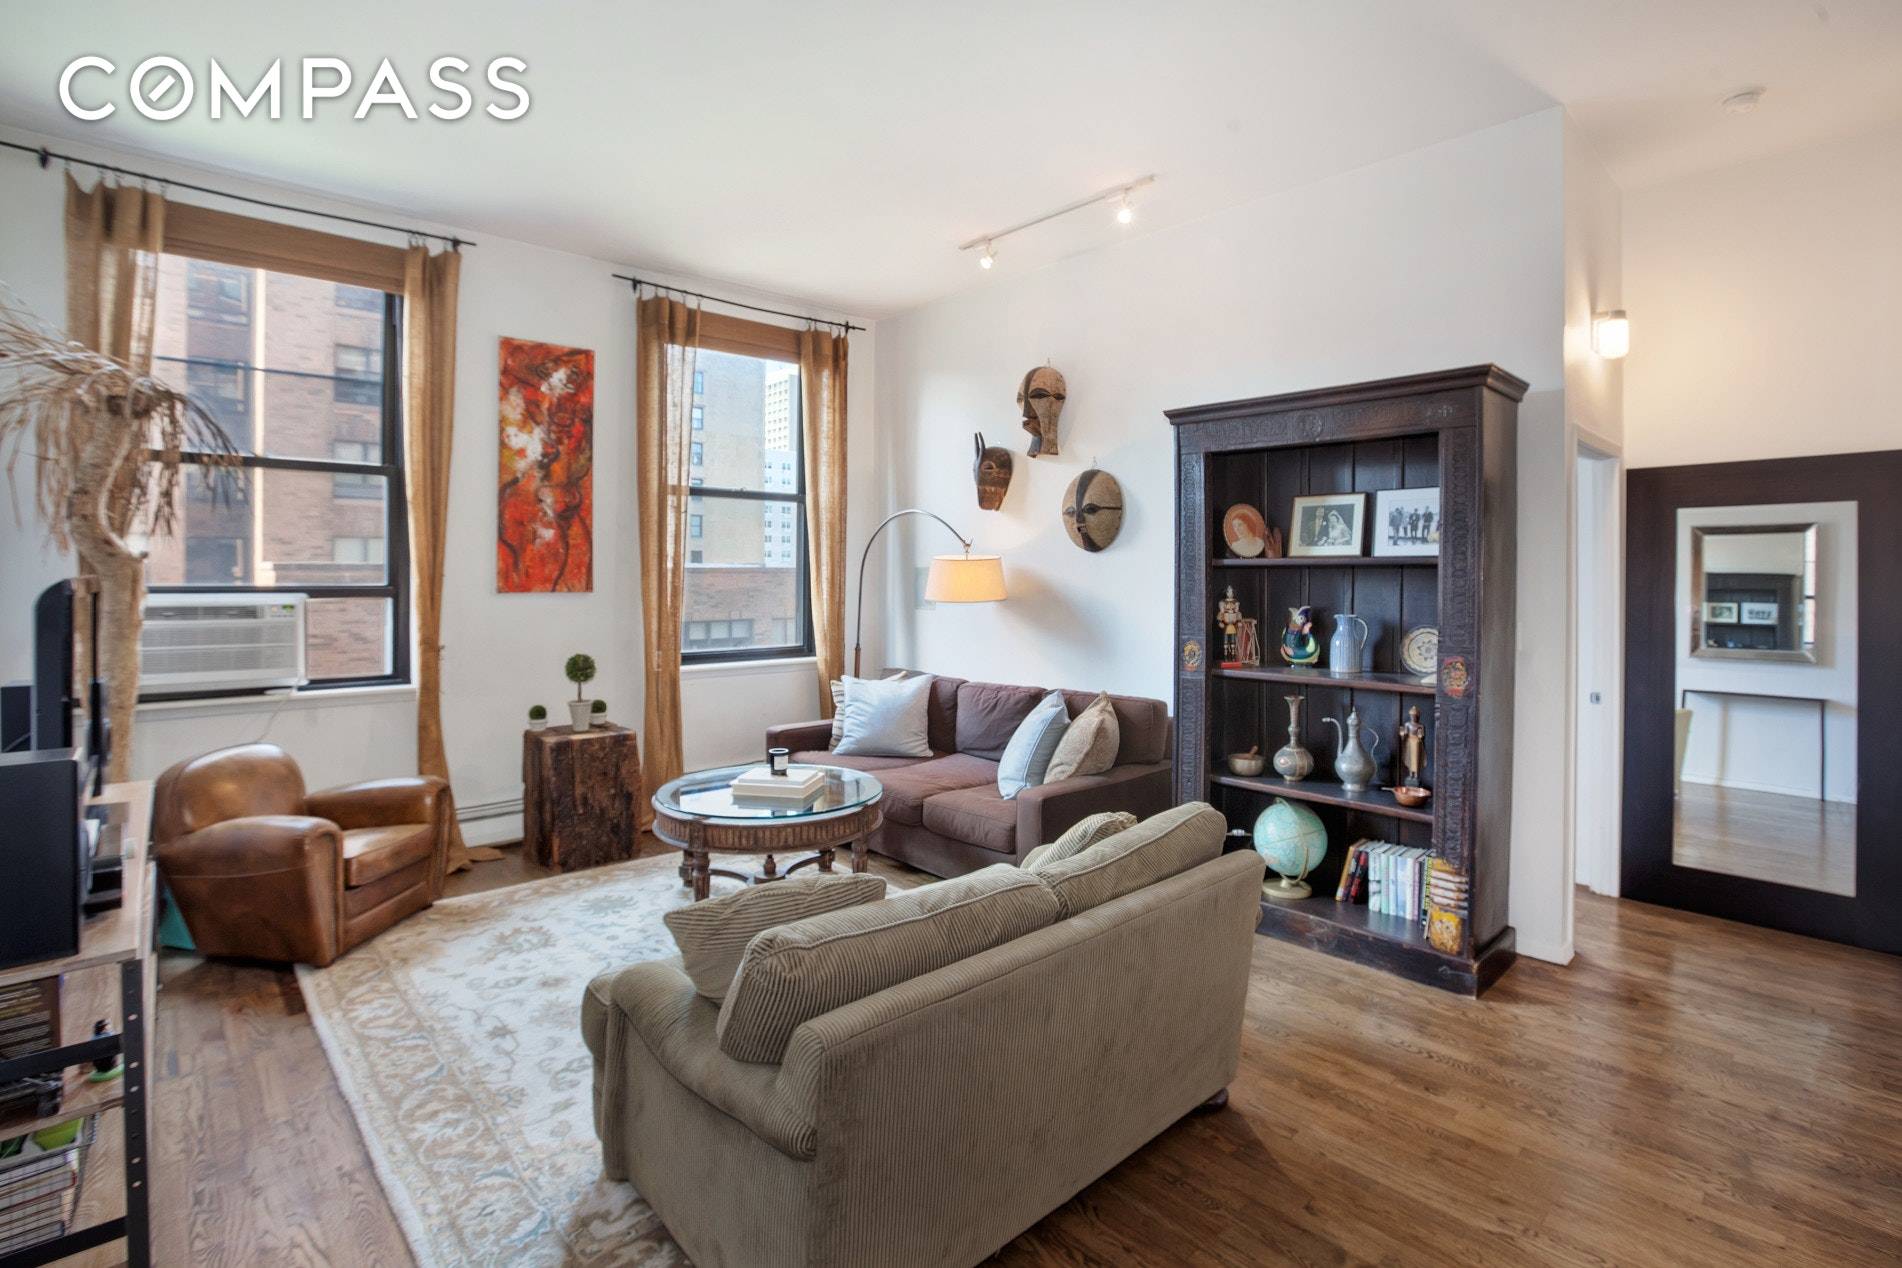 Sept 15 move date. Welcome home to your special loft in the heart of Greenwich Village.